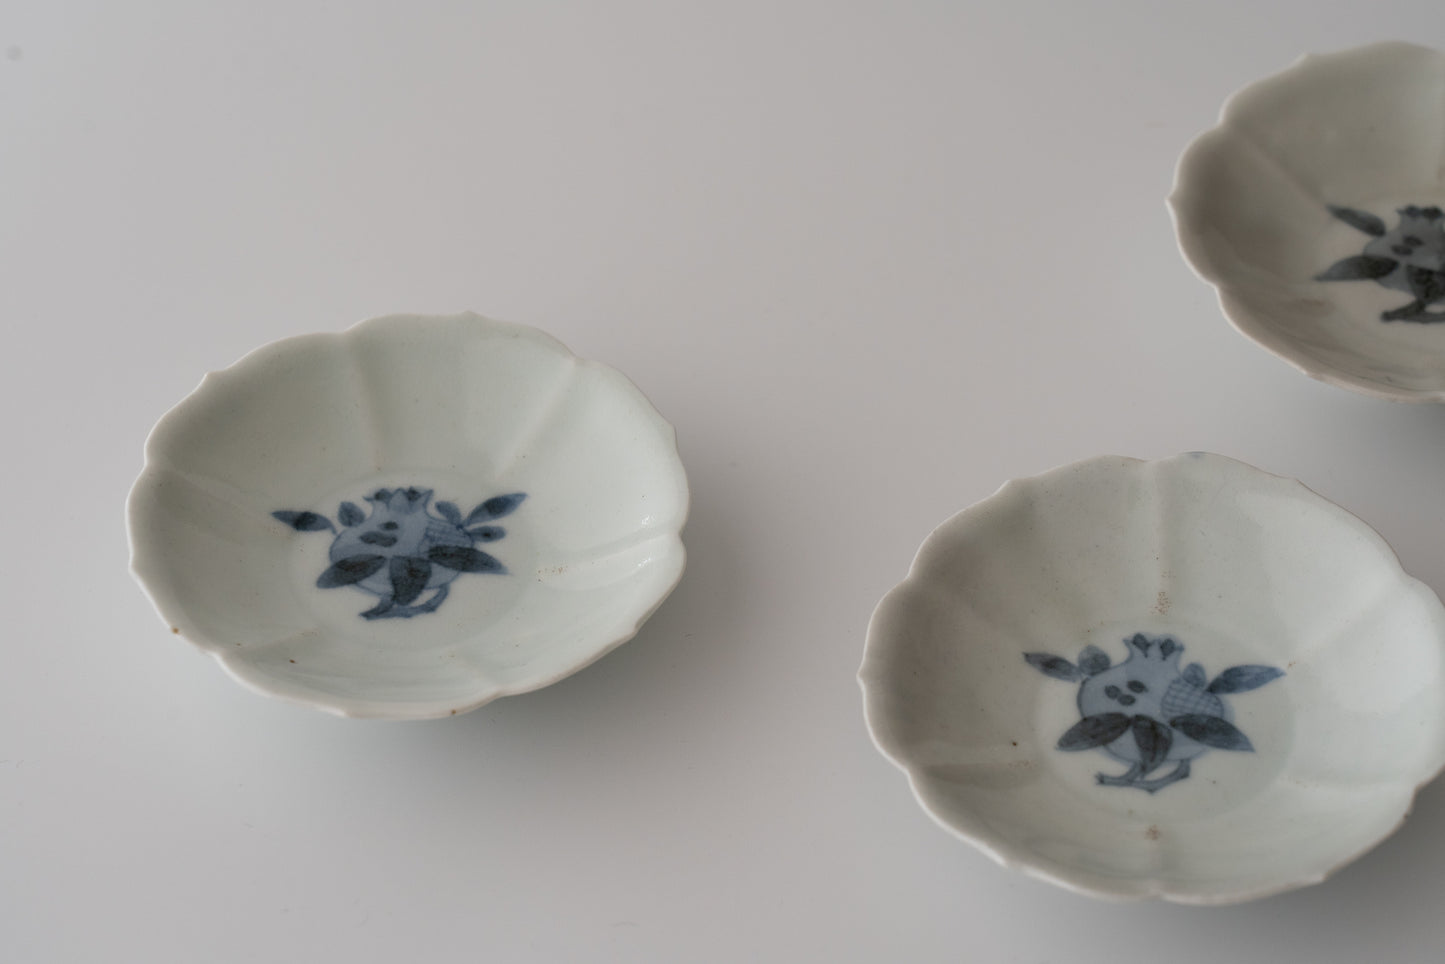 A set of five small dishes with pomegranate design, Early Imari ware